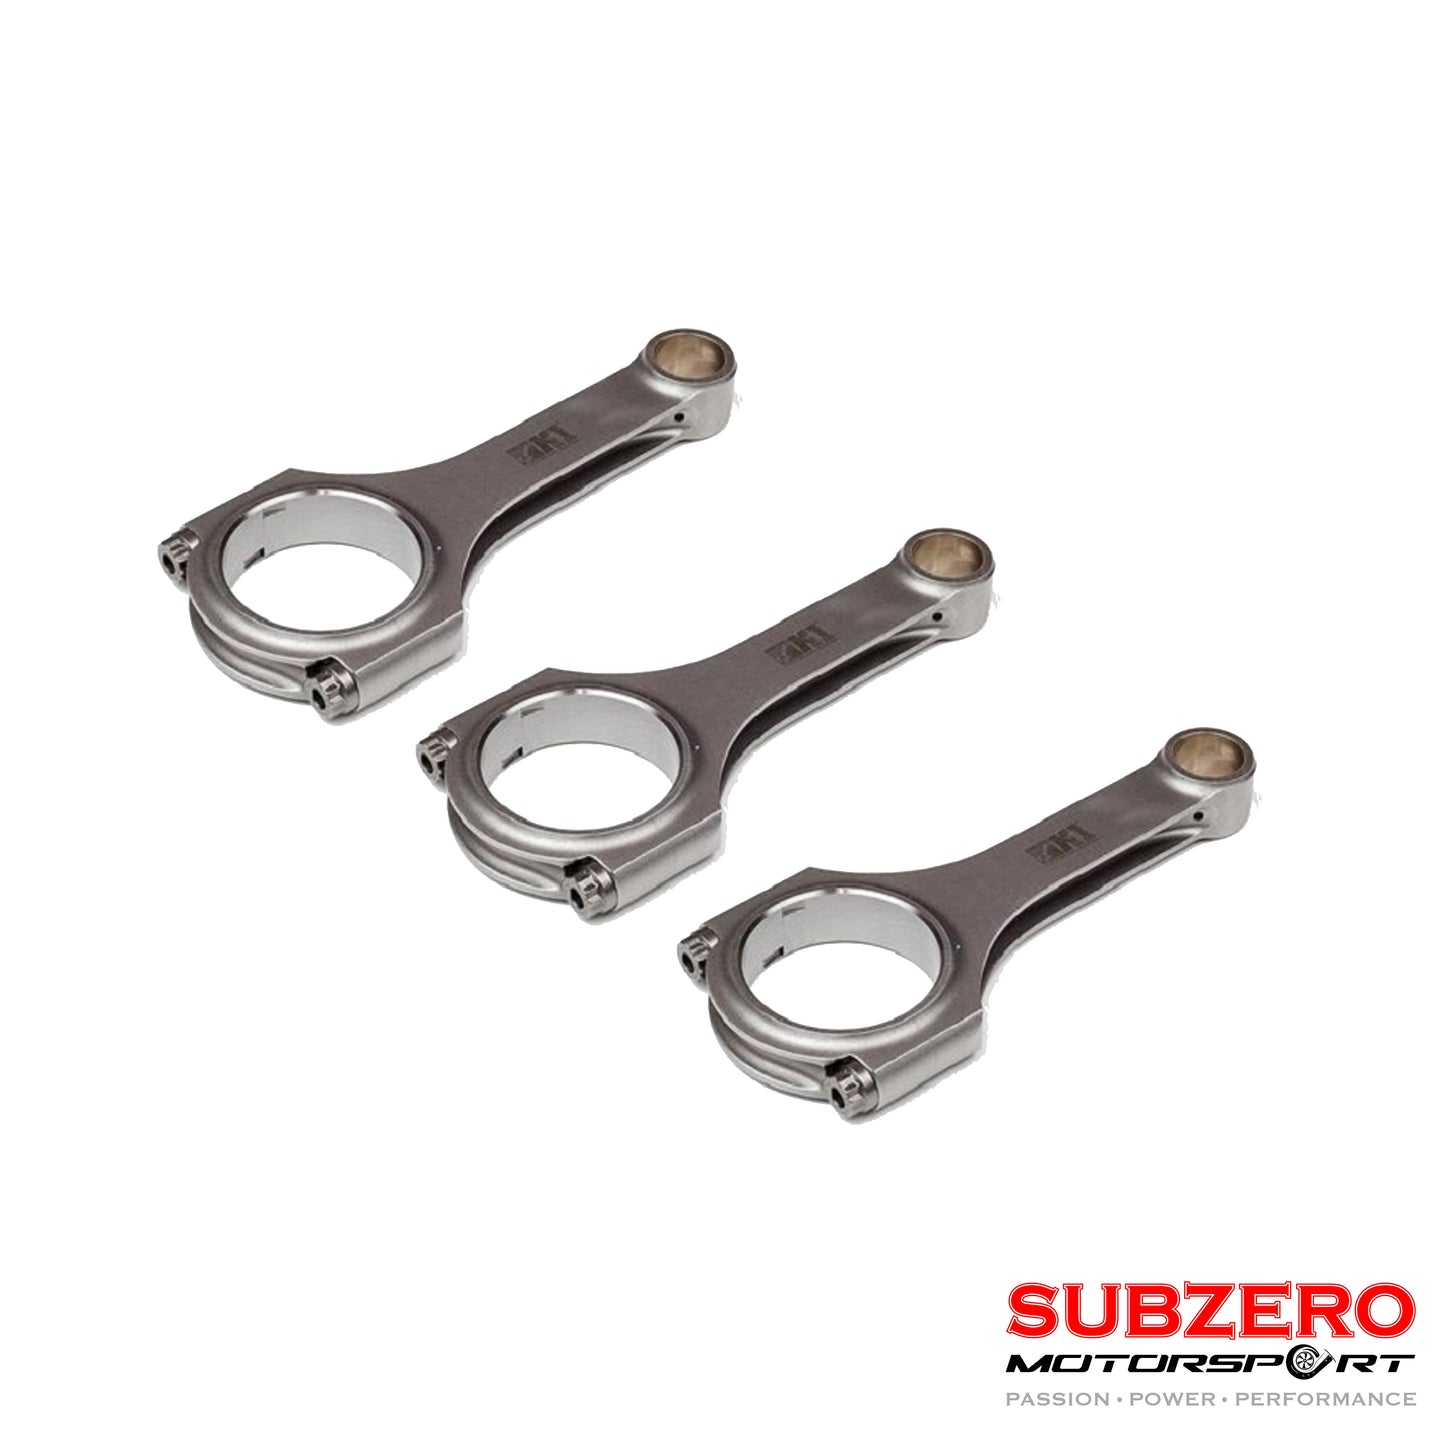 K1 Technologies 6.125 In Forged H-Beam Connecting Rod P/N 012Ae25613